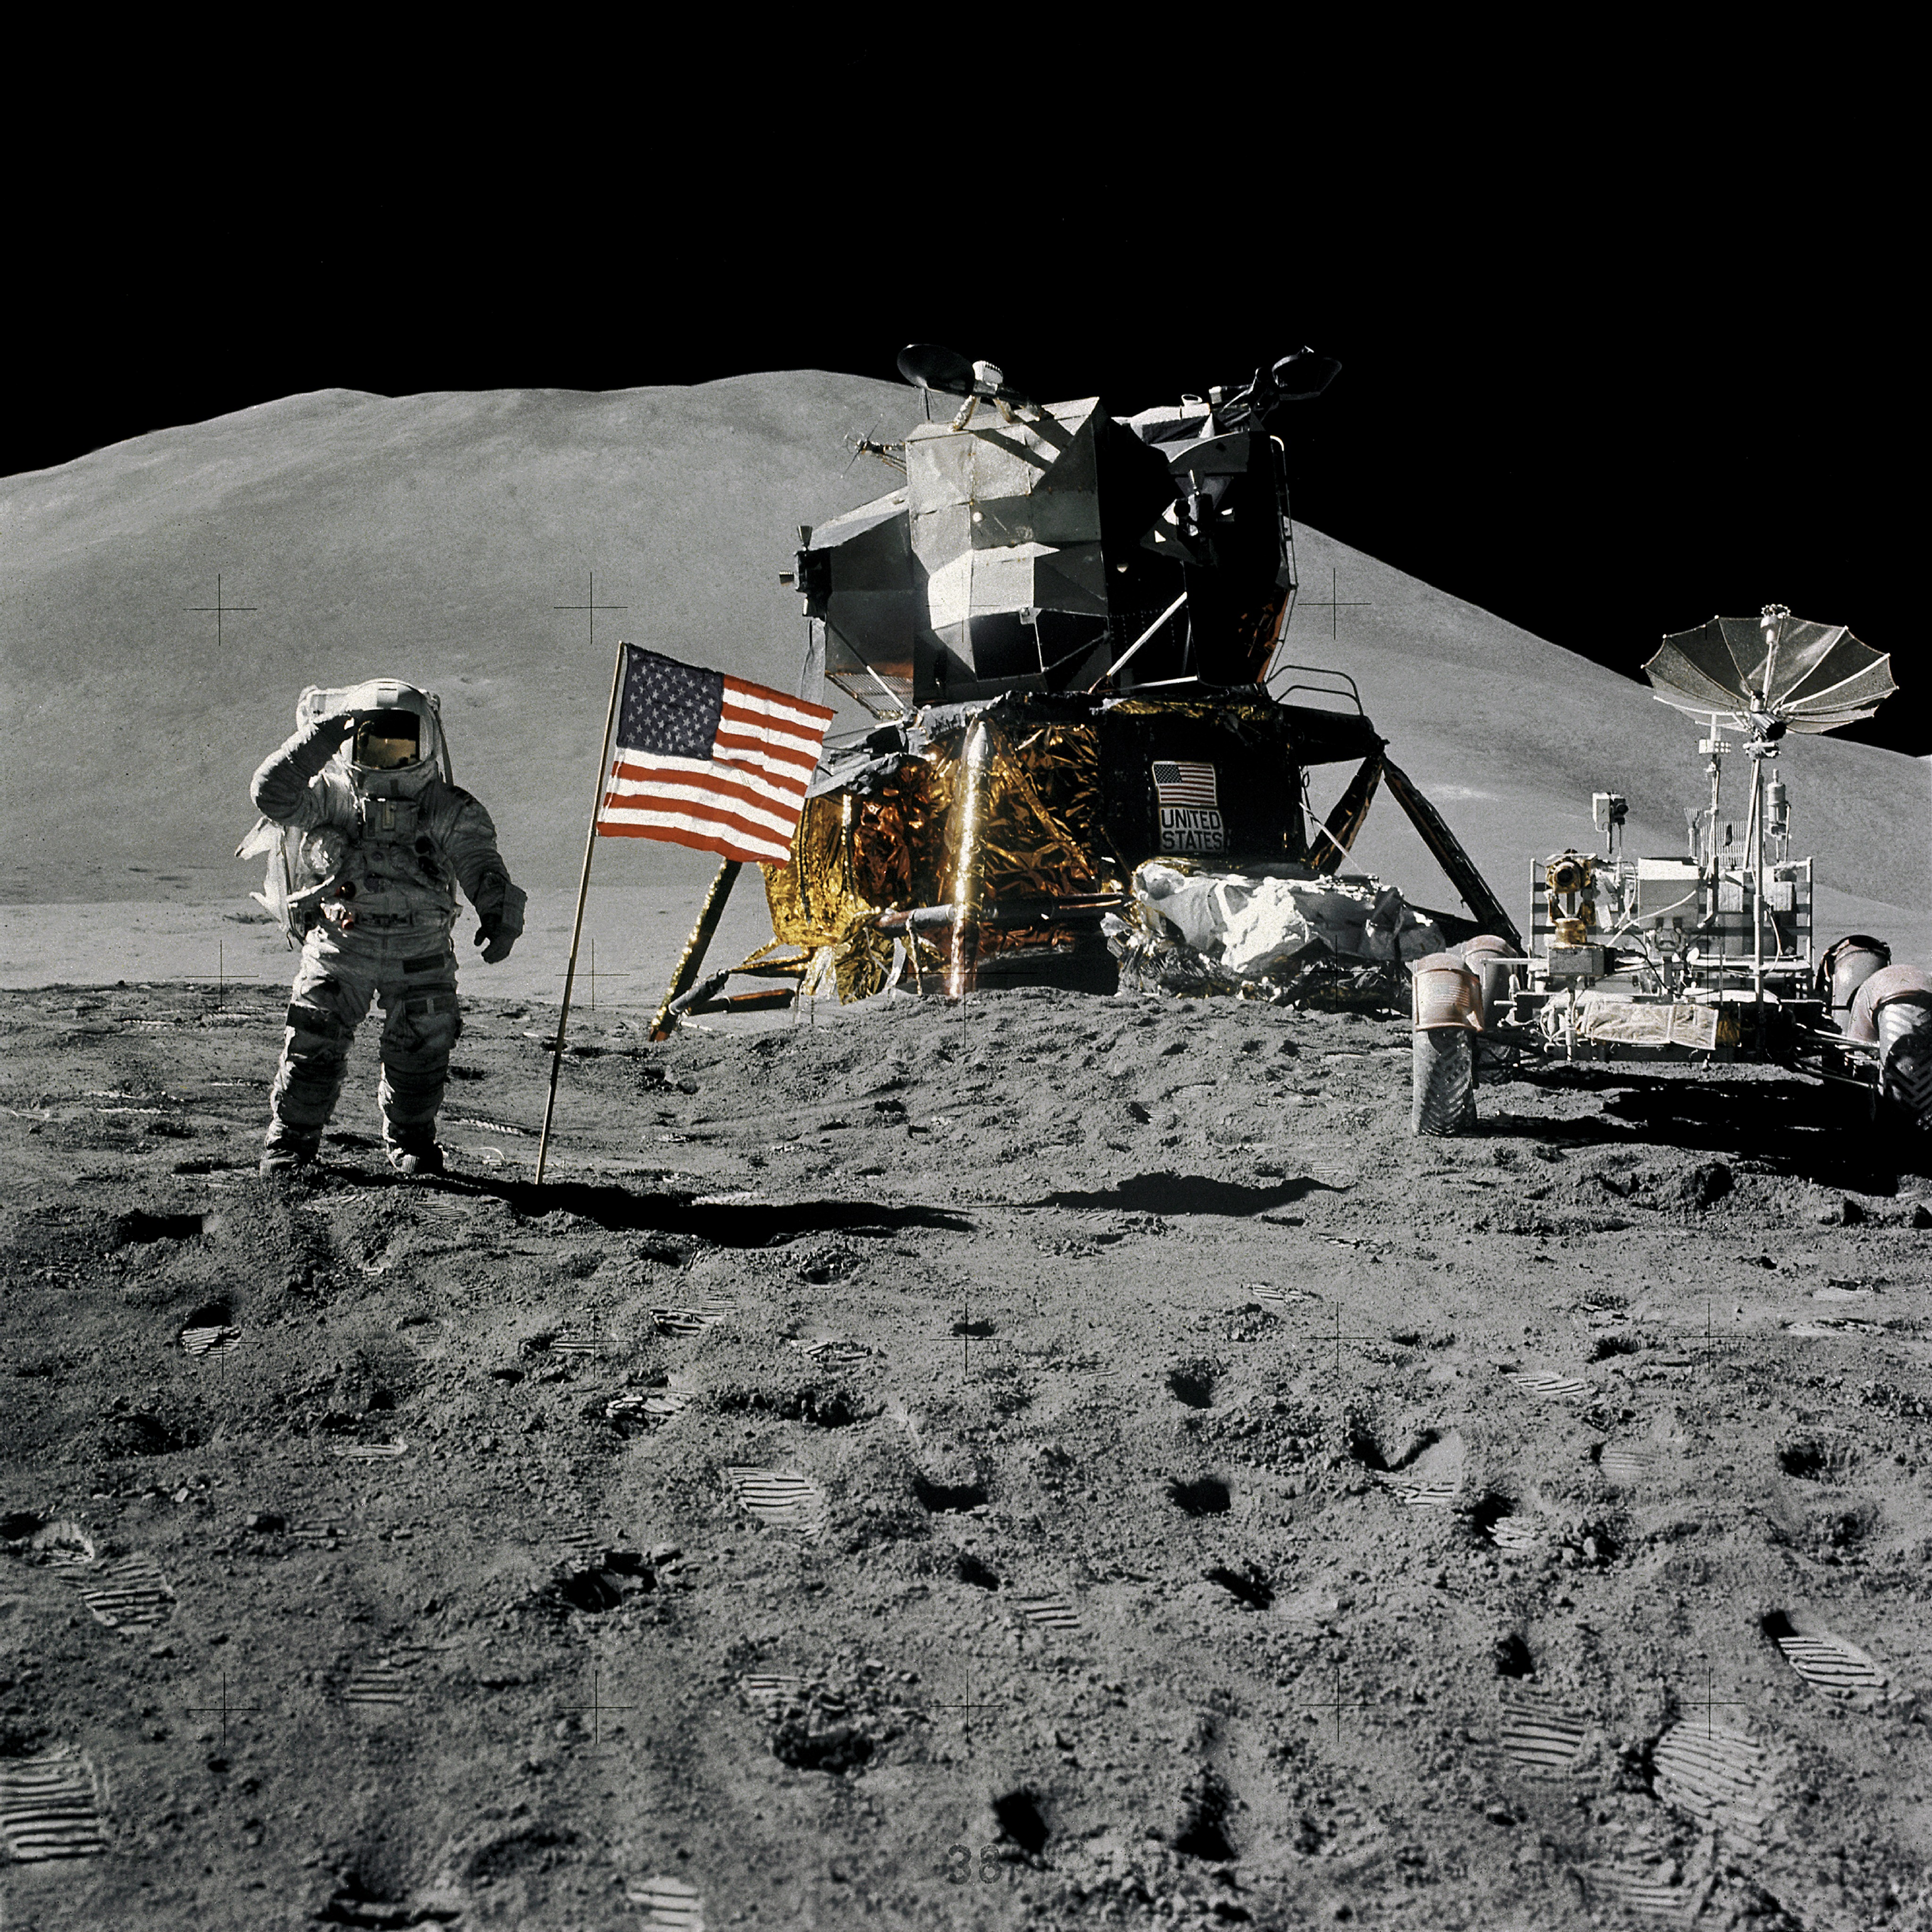 Astronaut James B. Irwin, lunar module pilot, gives a military salute while standing beside the deployed United States flag during the Apollo 15